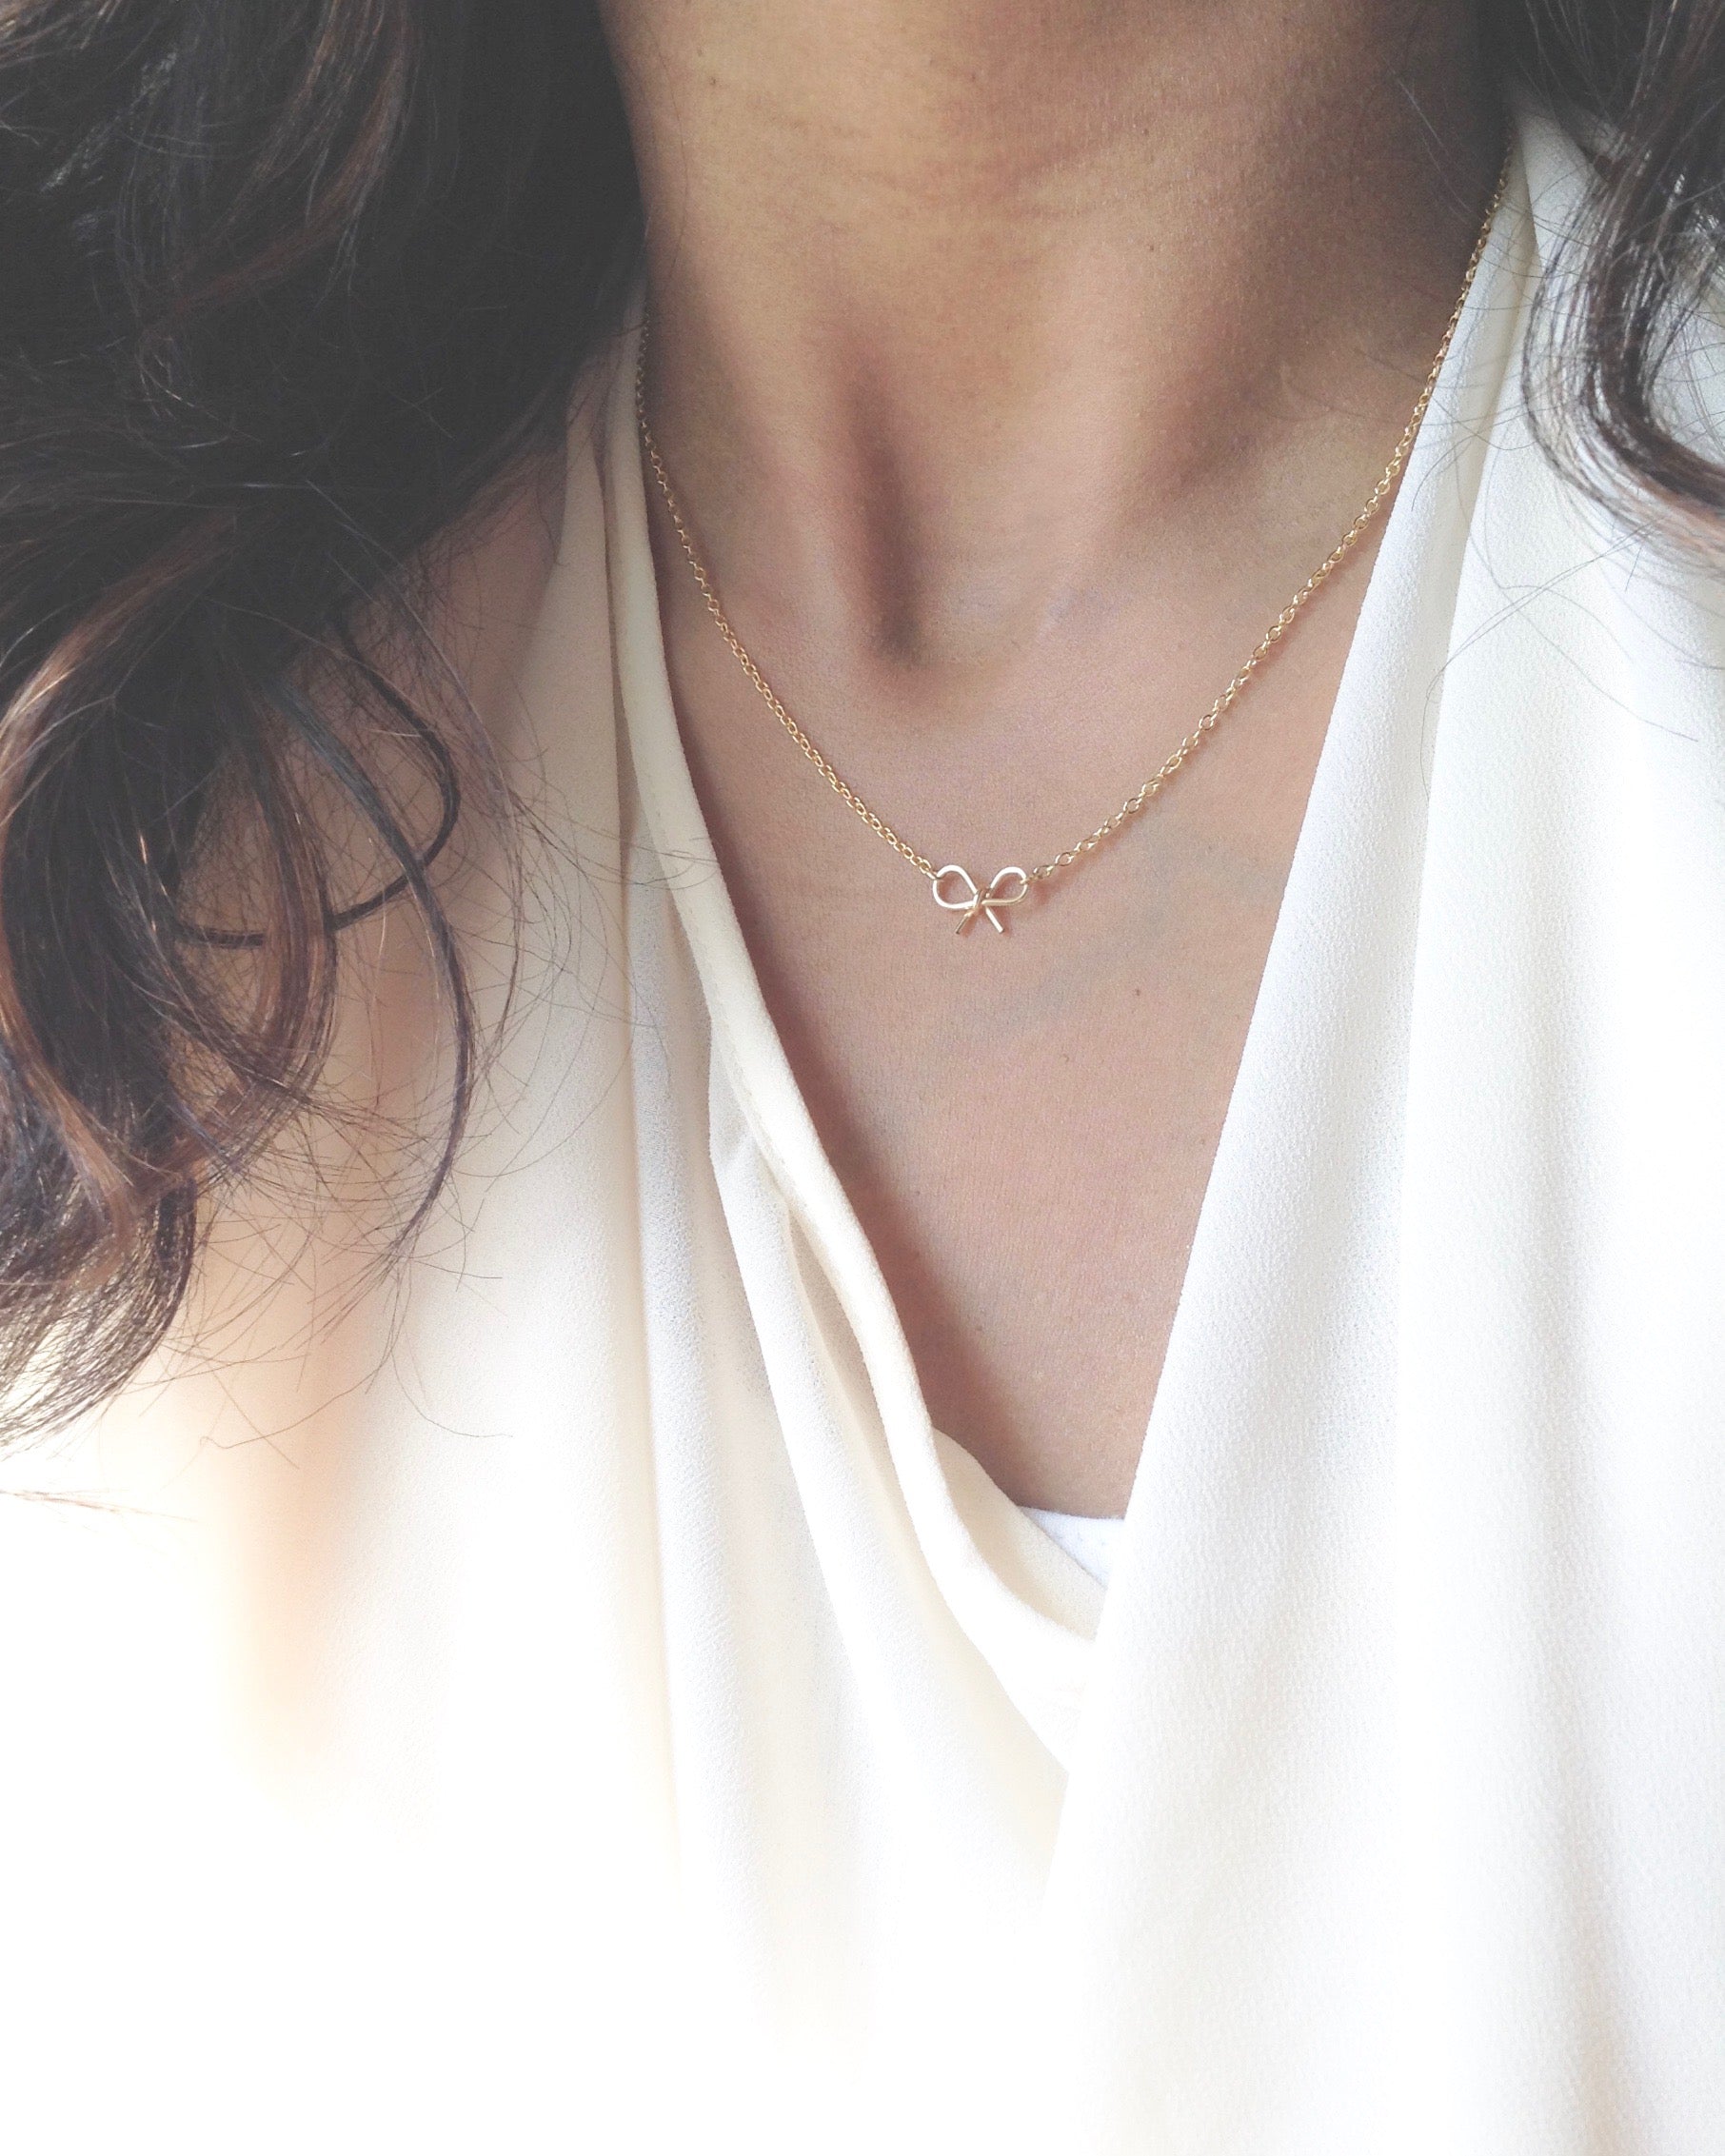 Simple Bow Necklace | Small Dainty Necklace | IB Jewelry Sterling Silver / 18